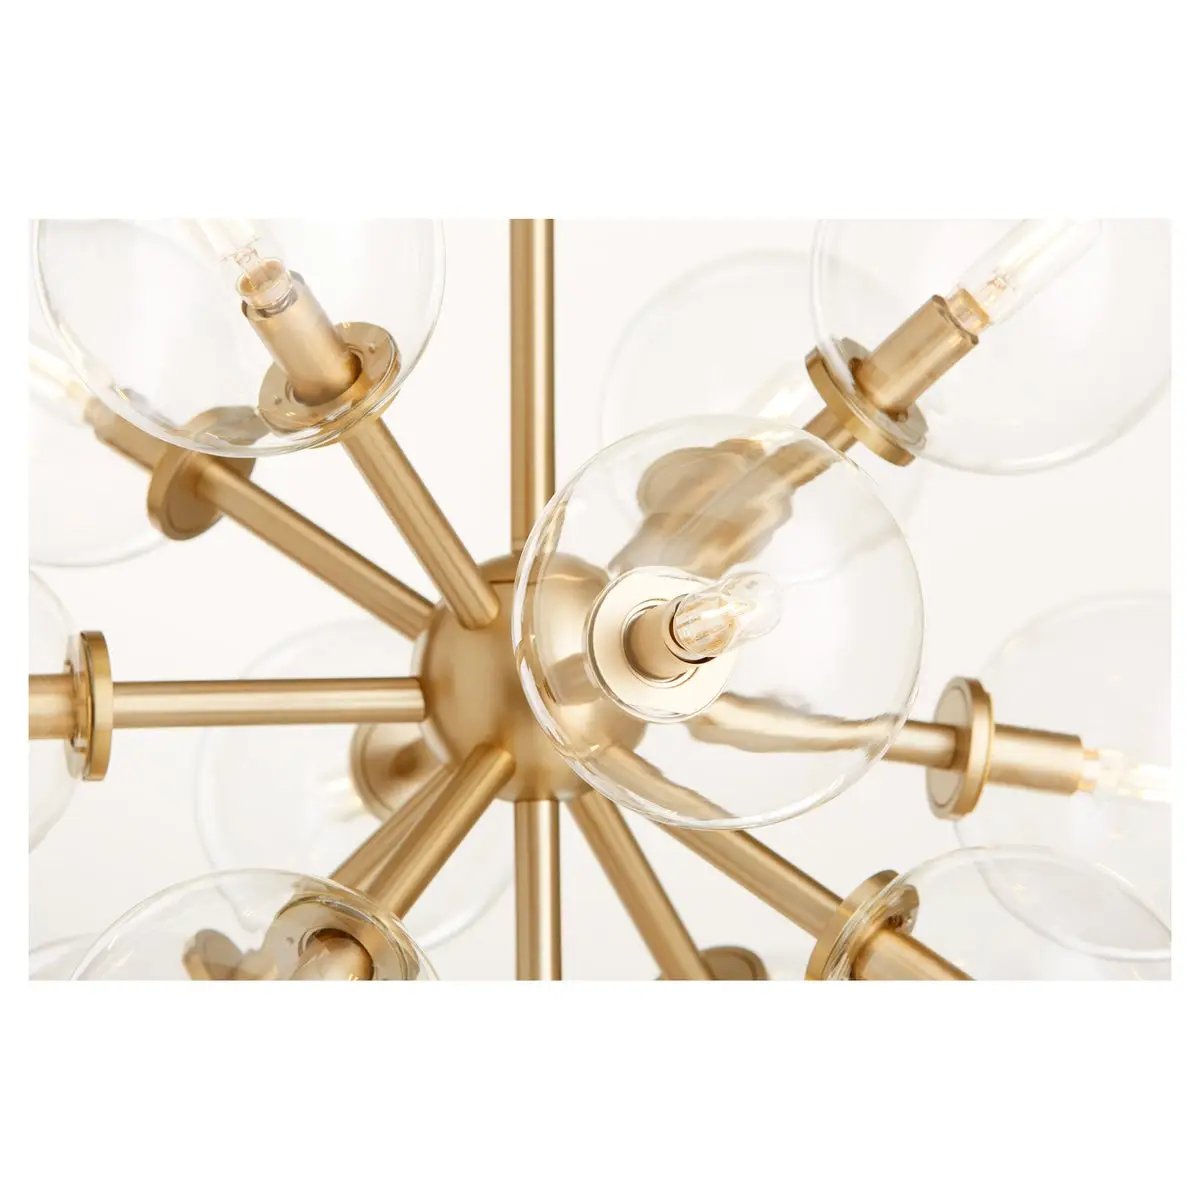 Sputnik Chandelier with clear glass domes and aged brass frames, creating a mid-century modern appeal. 13 bulbs, 60W, dimmable. UL Listed. 26"W x 22"H.